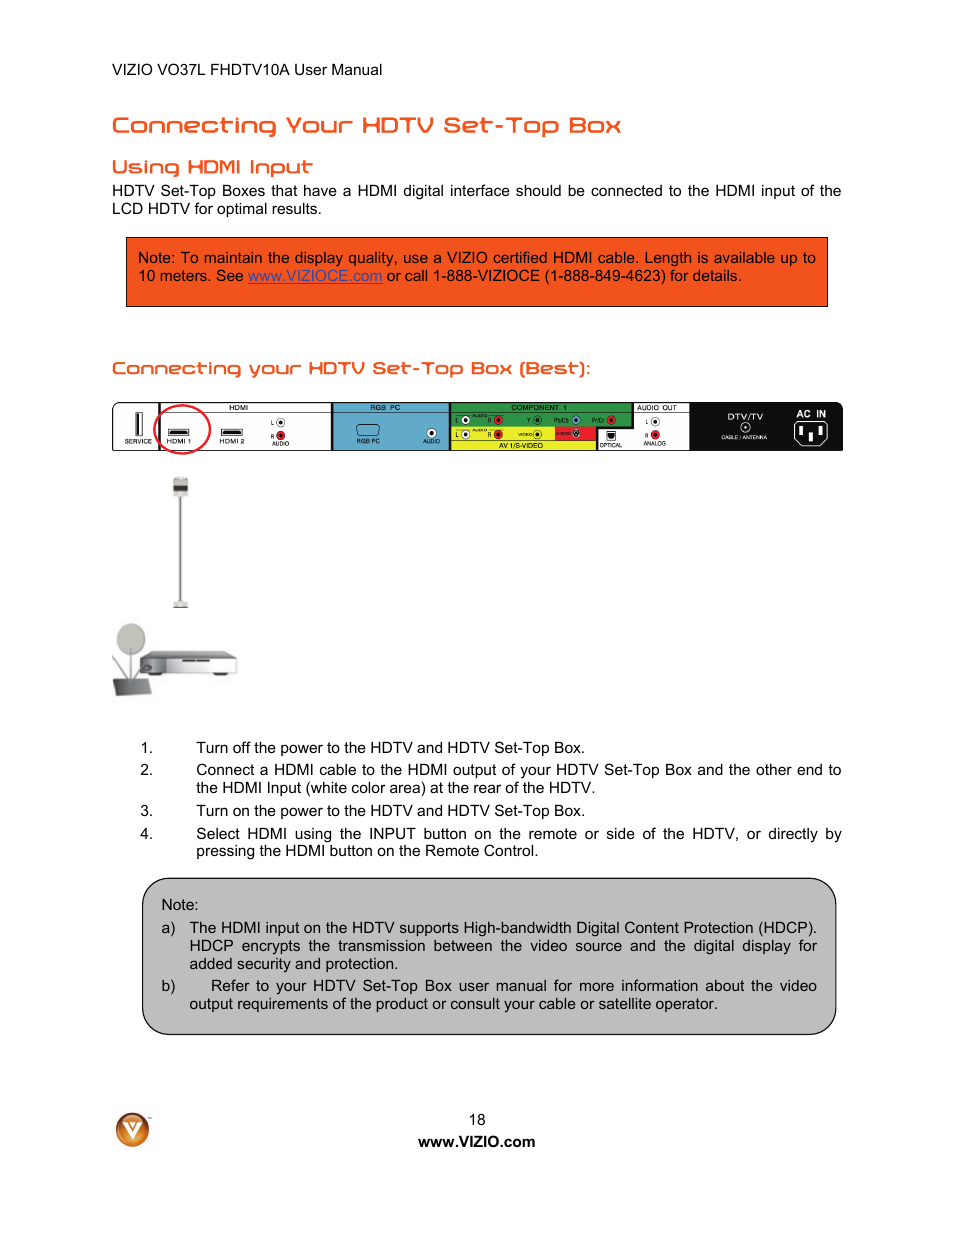 Connecting your hdtv set-top box | Vizio VO37L FHDTV10A User Manual | Page 18 / 80